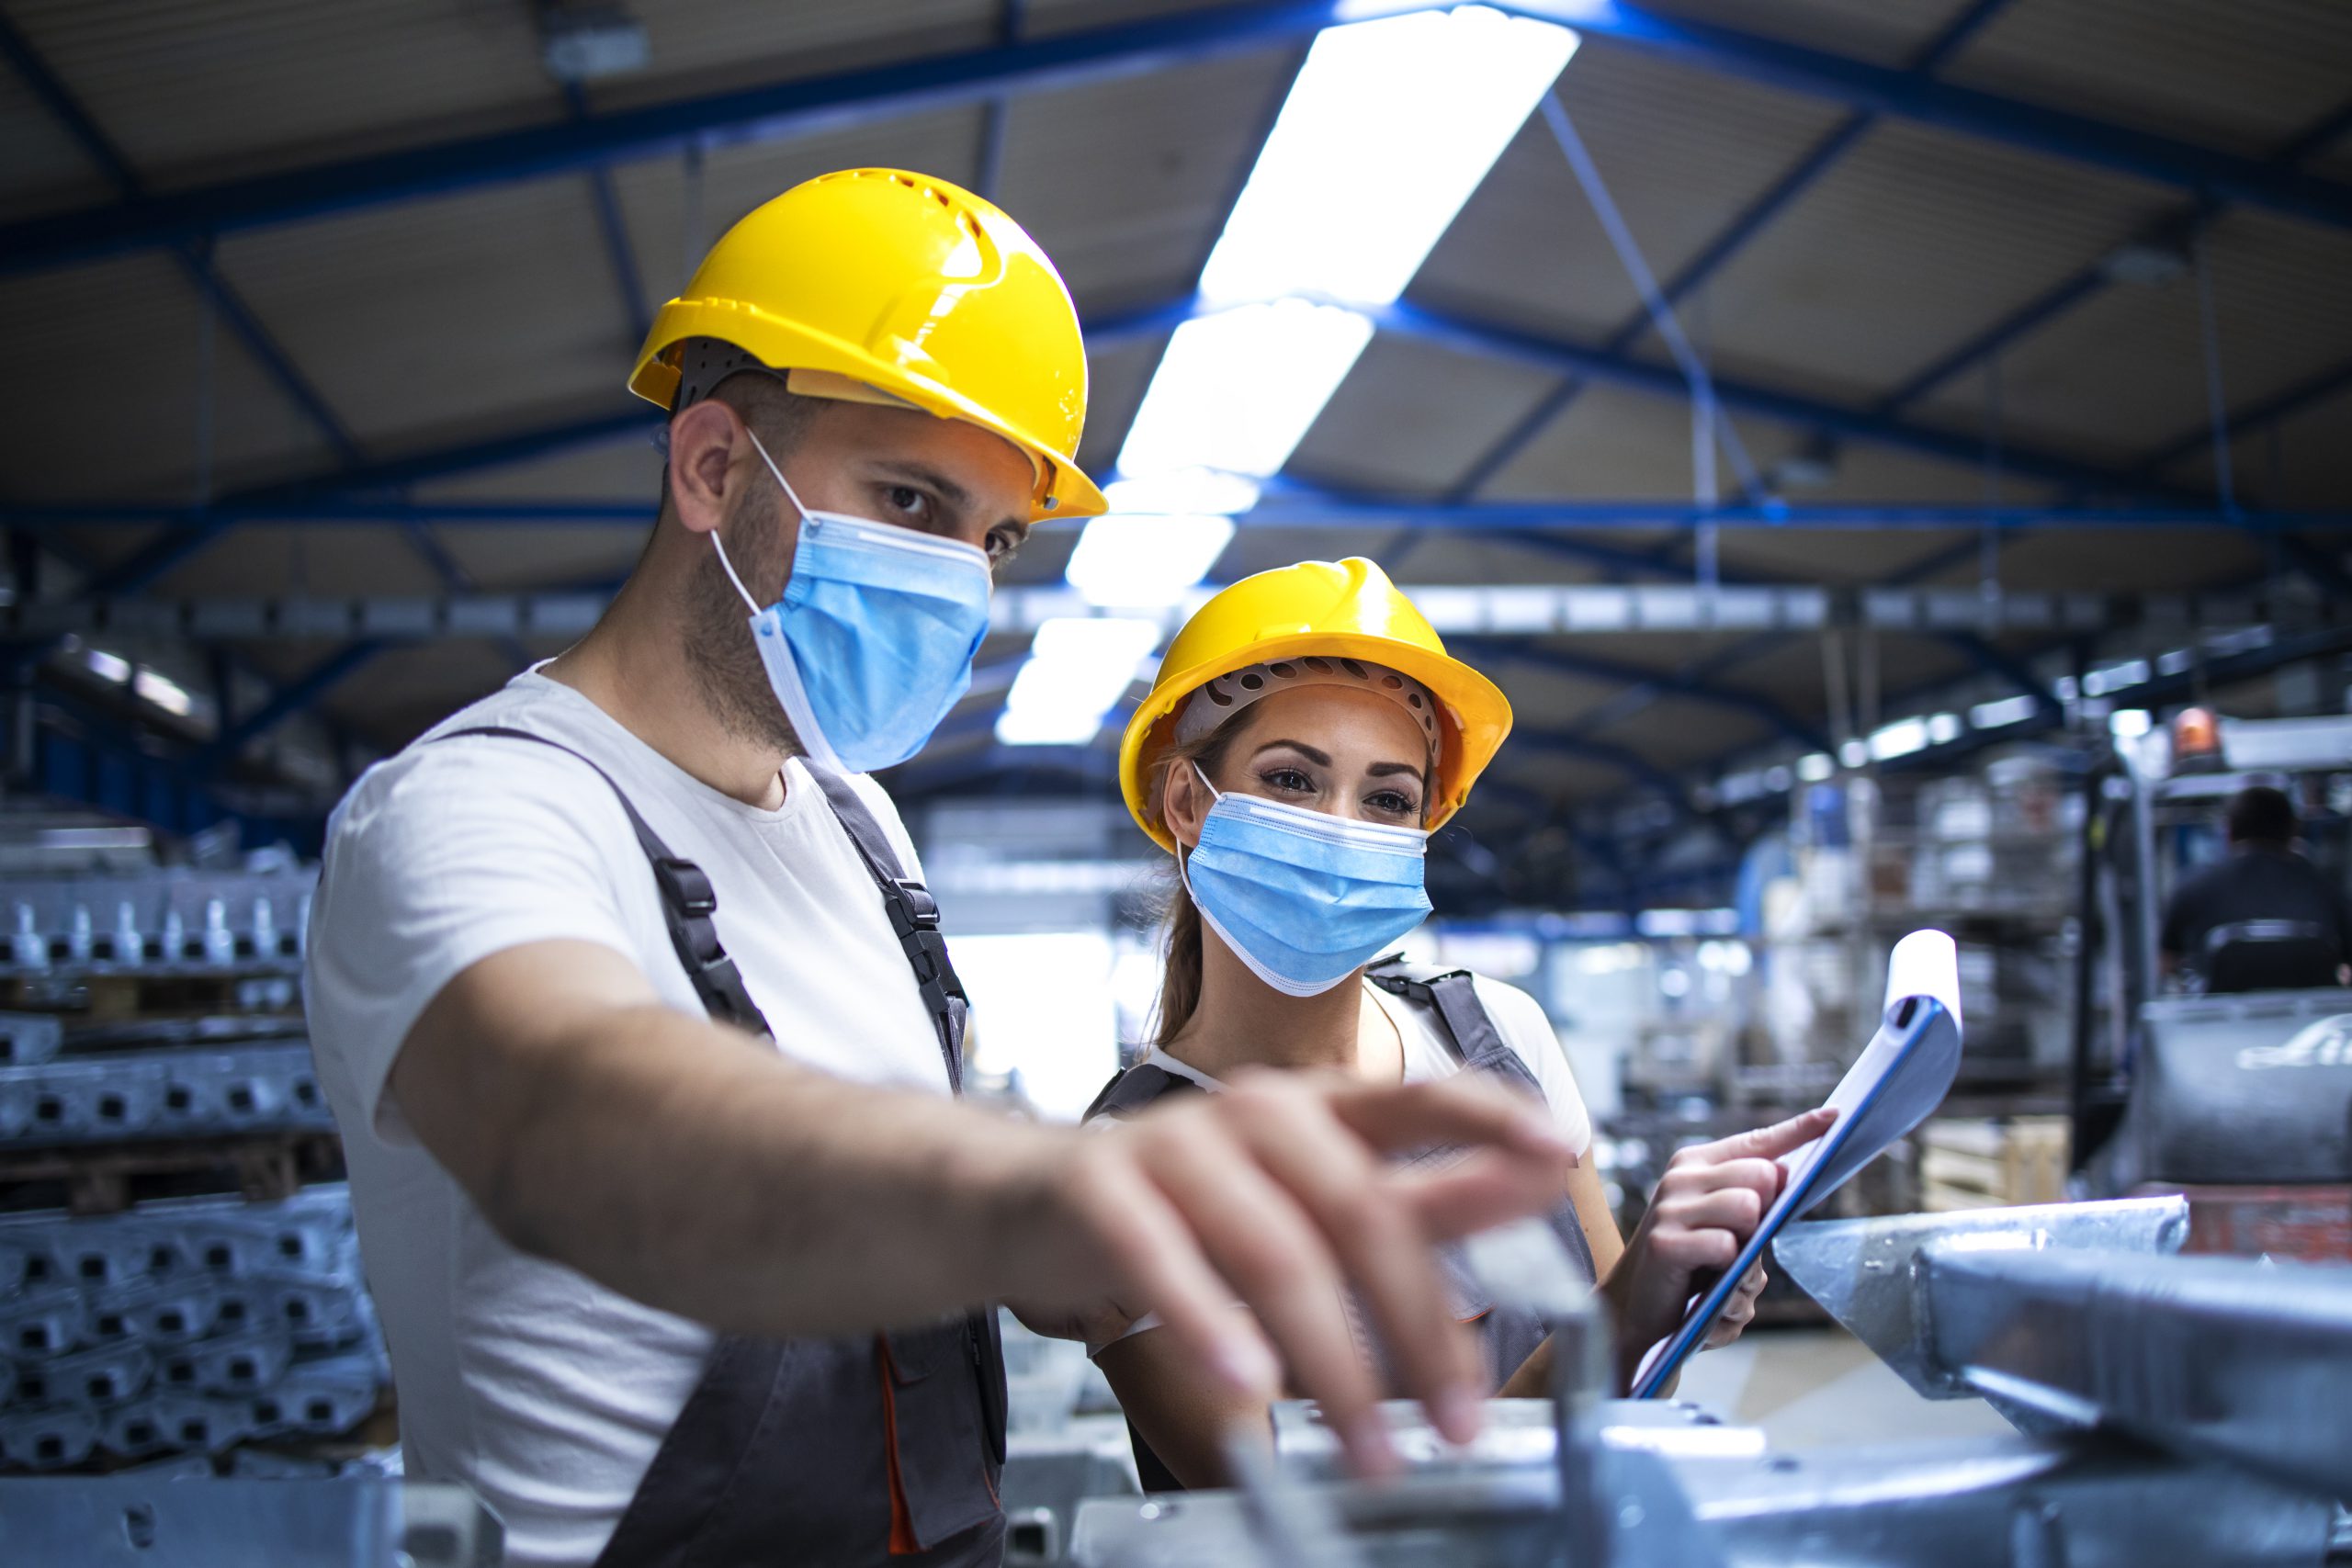 Many manufacturers have been forced to transform their operating models and change supply chain strategies to stay active during the pandemic.